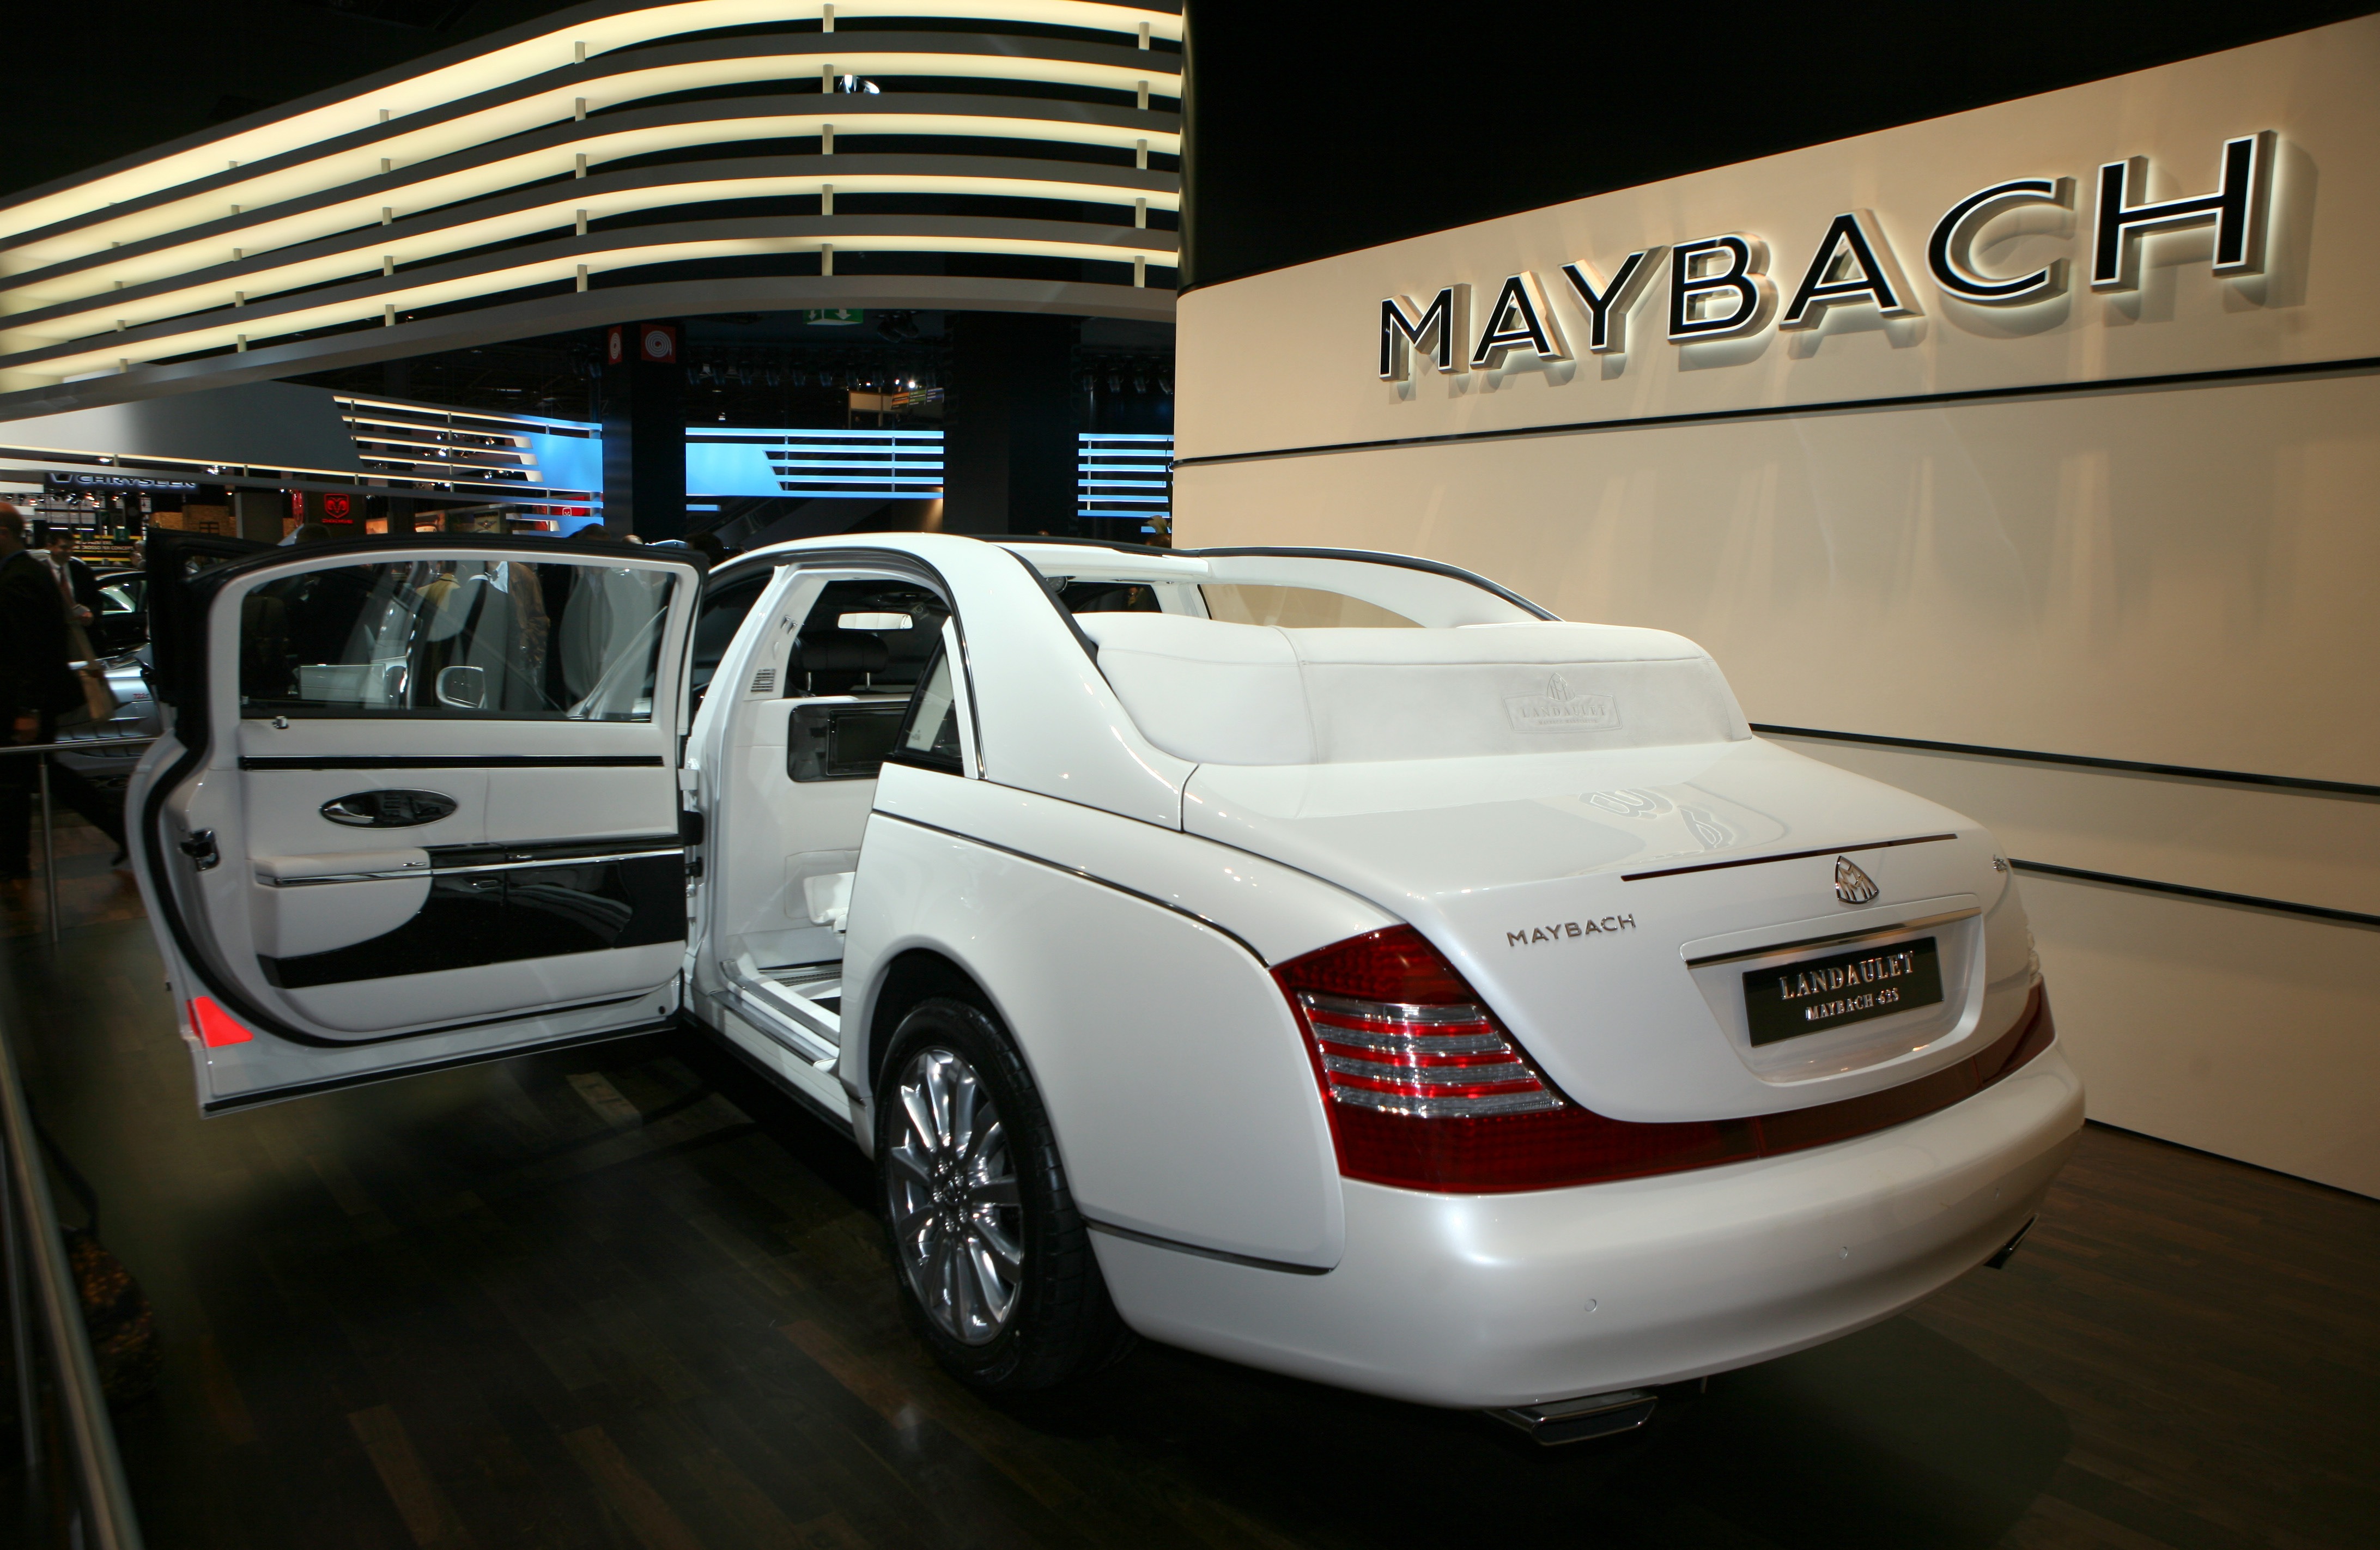 A glimpse of the Maybach 62S Landaulet at the Paris Motor Show